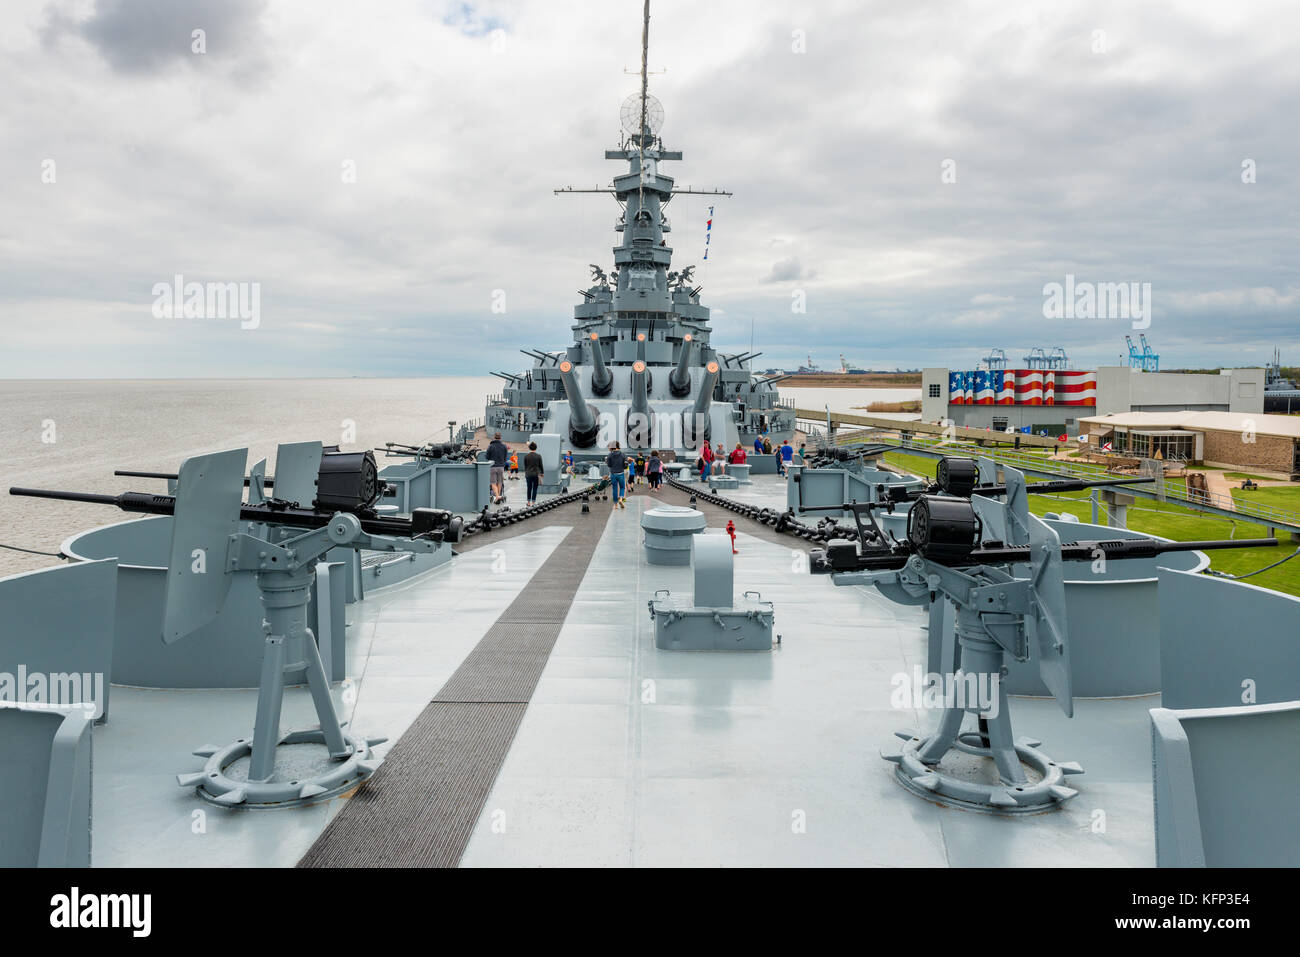 The USS Alabama Battleship at the Memorial Park in Mobile, Alabama, USA. The park has a collection of notable military aircraft and museum ships Stock Photo